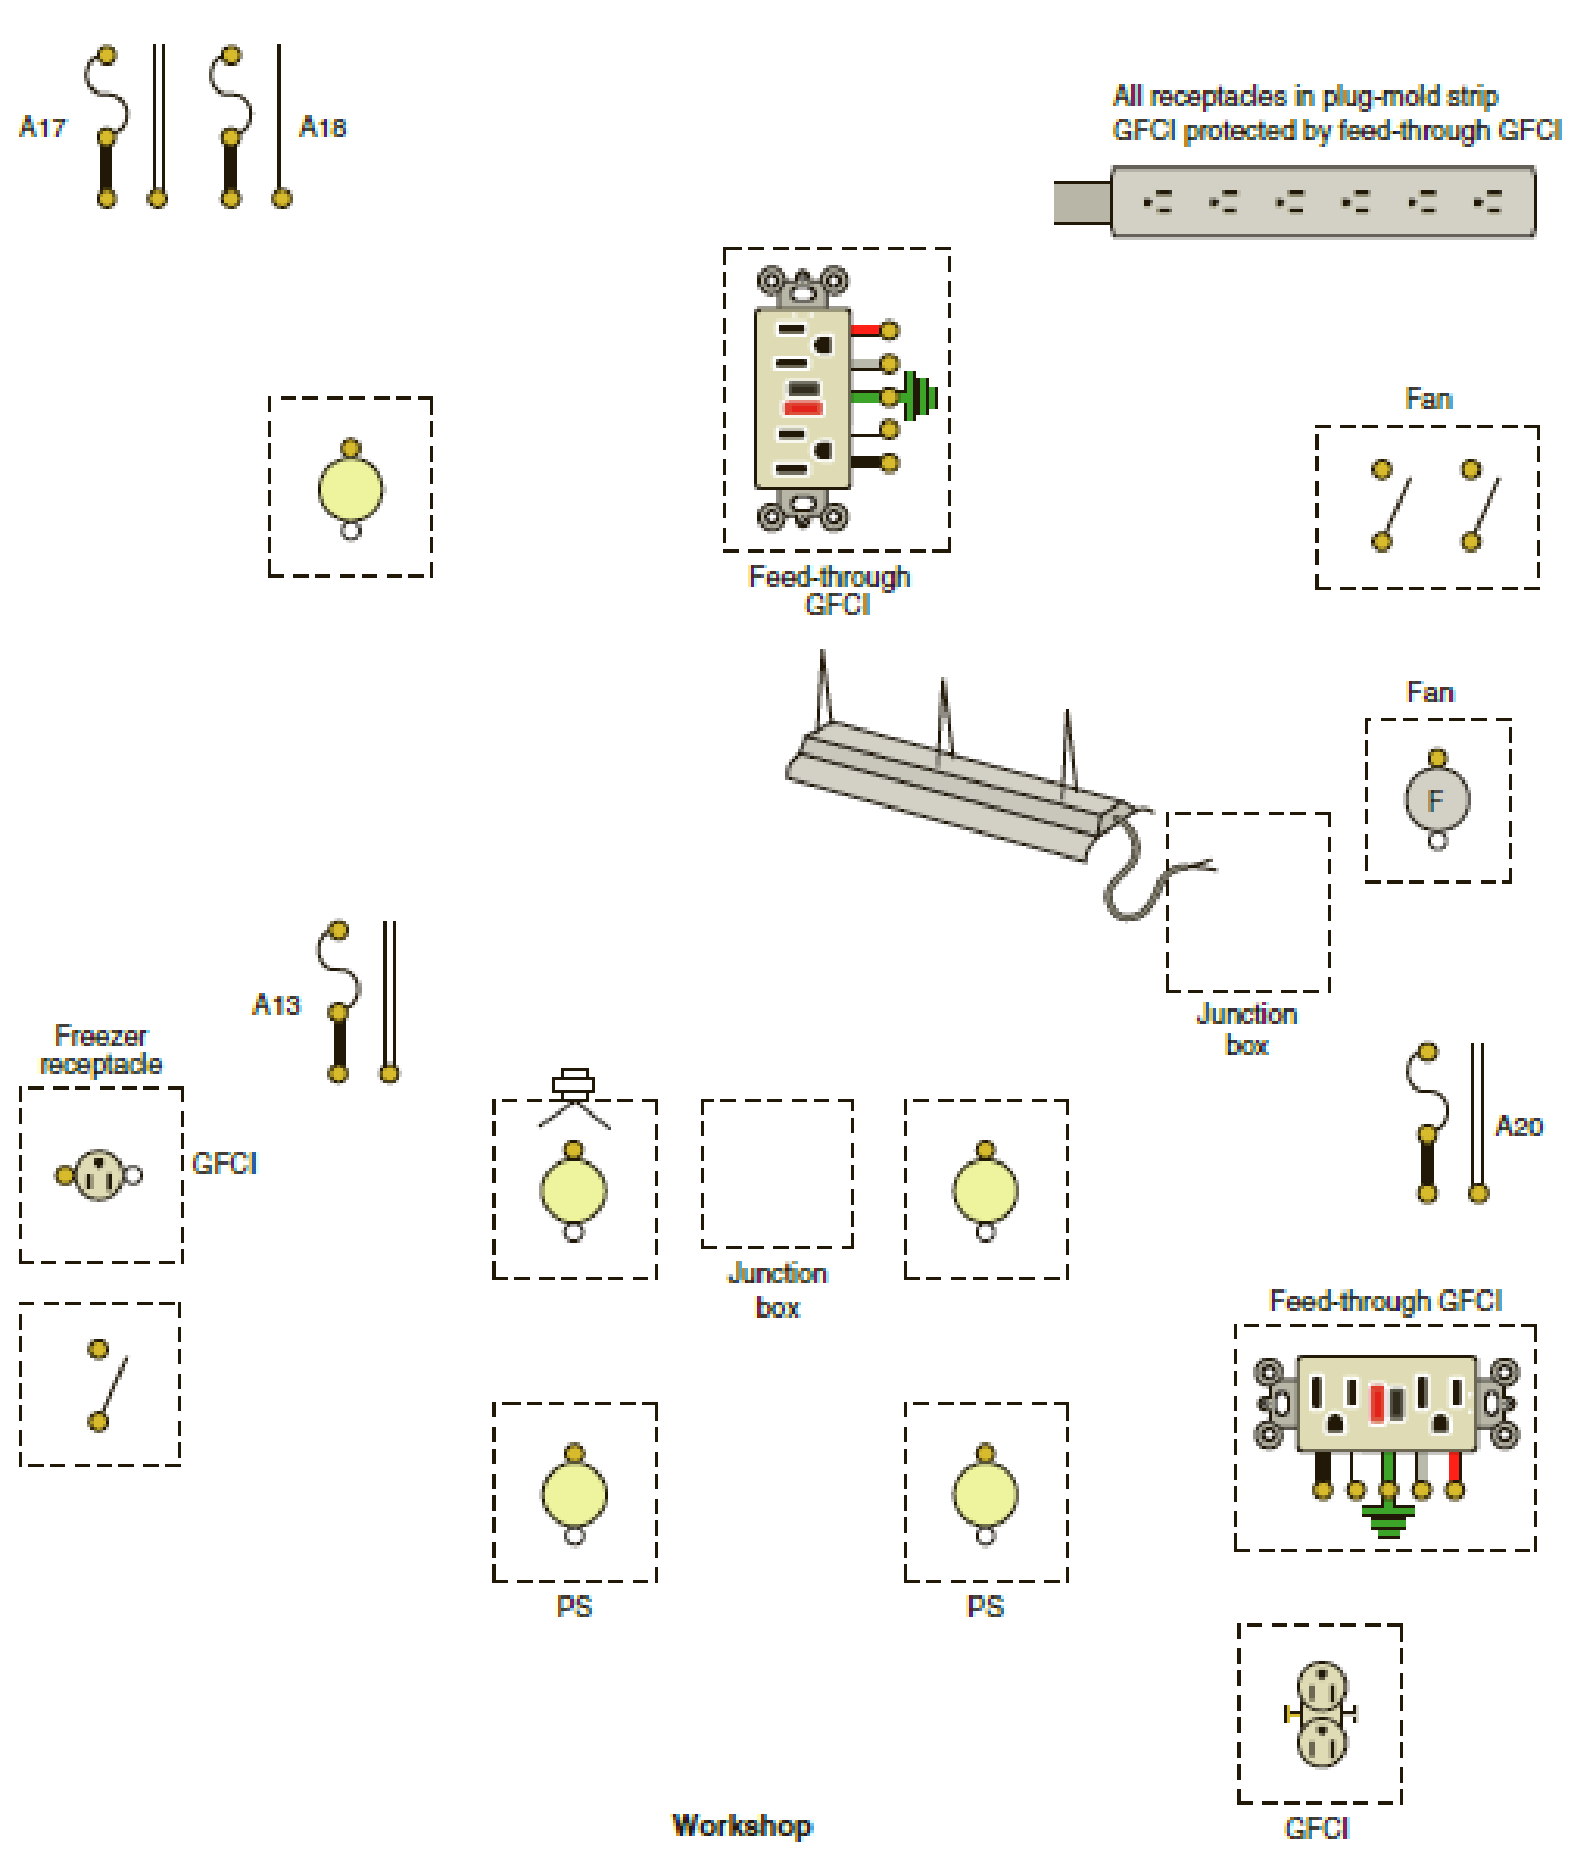 Chapter 18, Problem 26R, The following is a layout of the lighting circuits for the workshop. Using the wiring layout in 